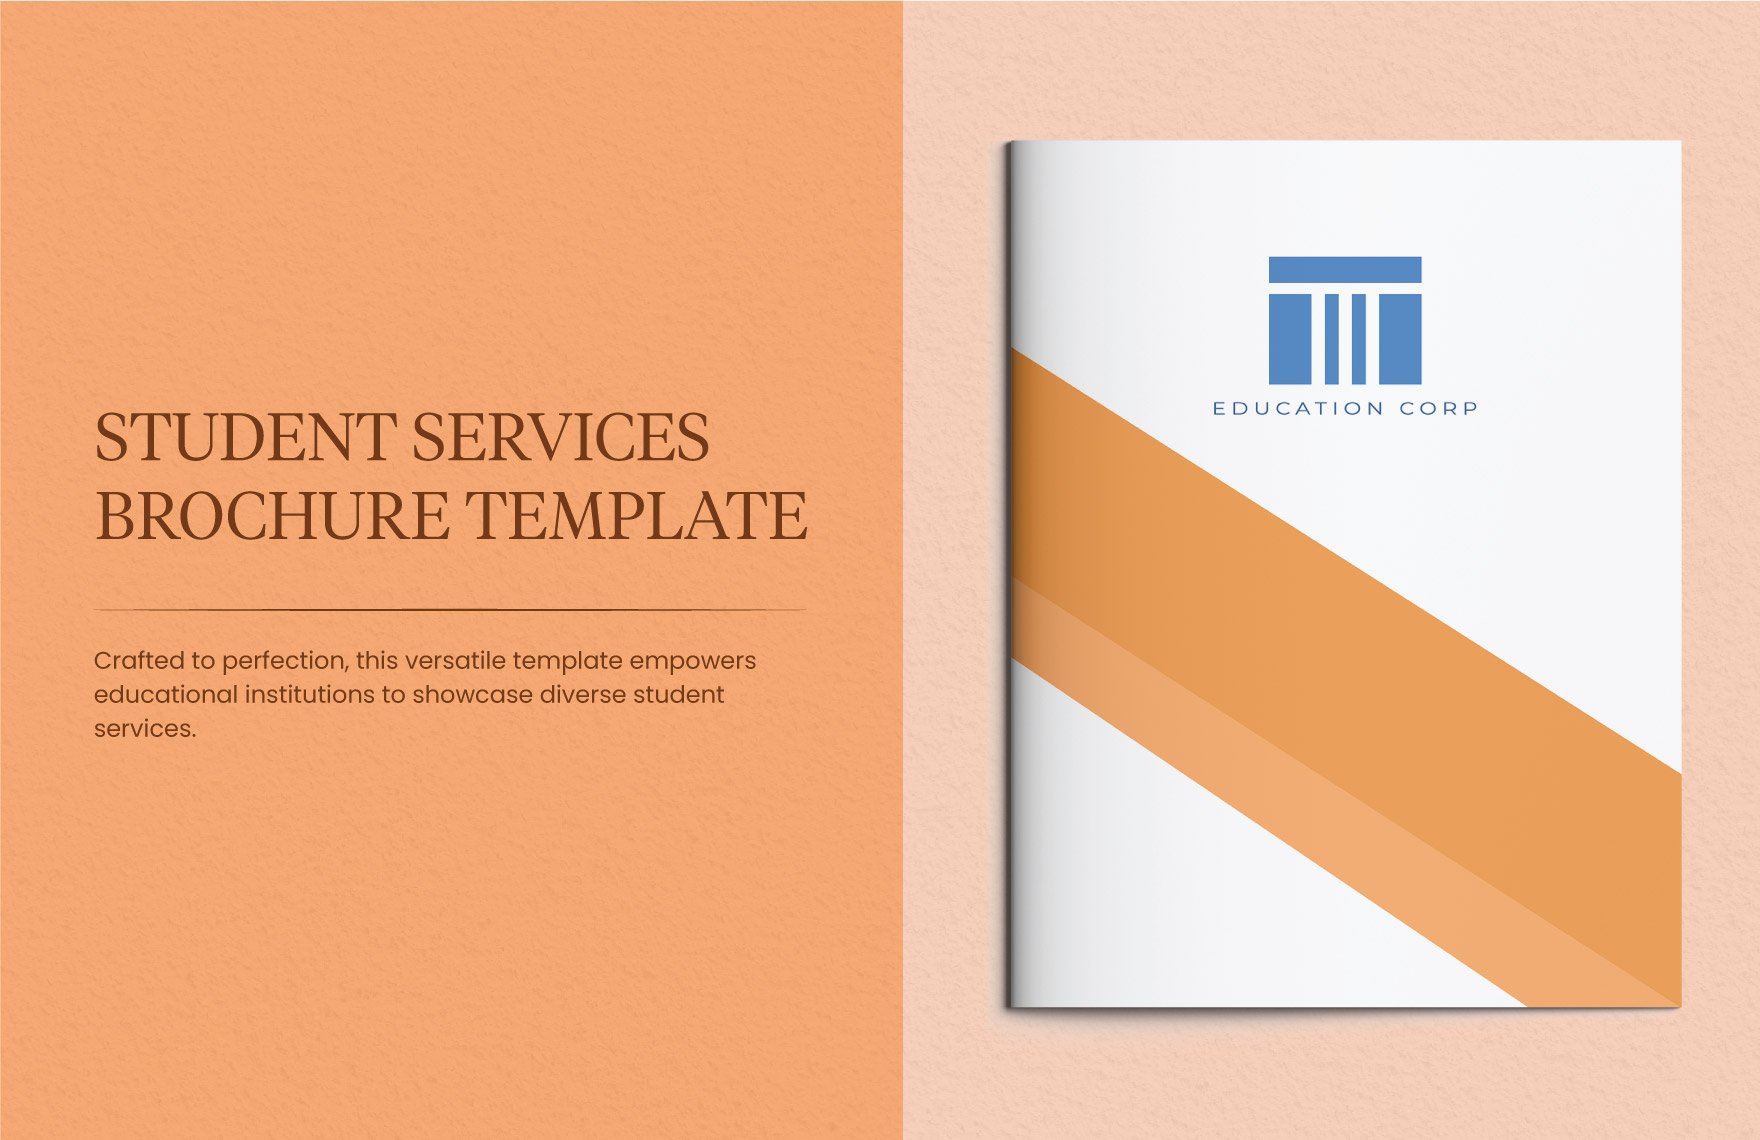 Student Services Brochure Template